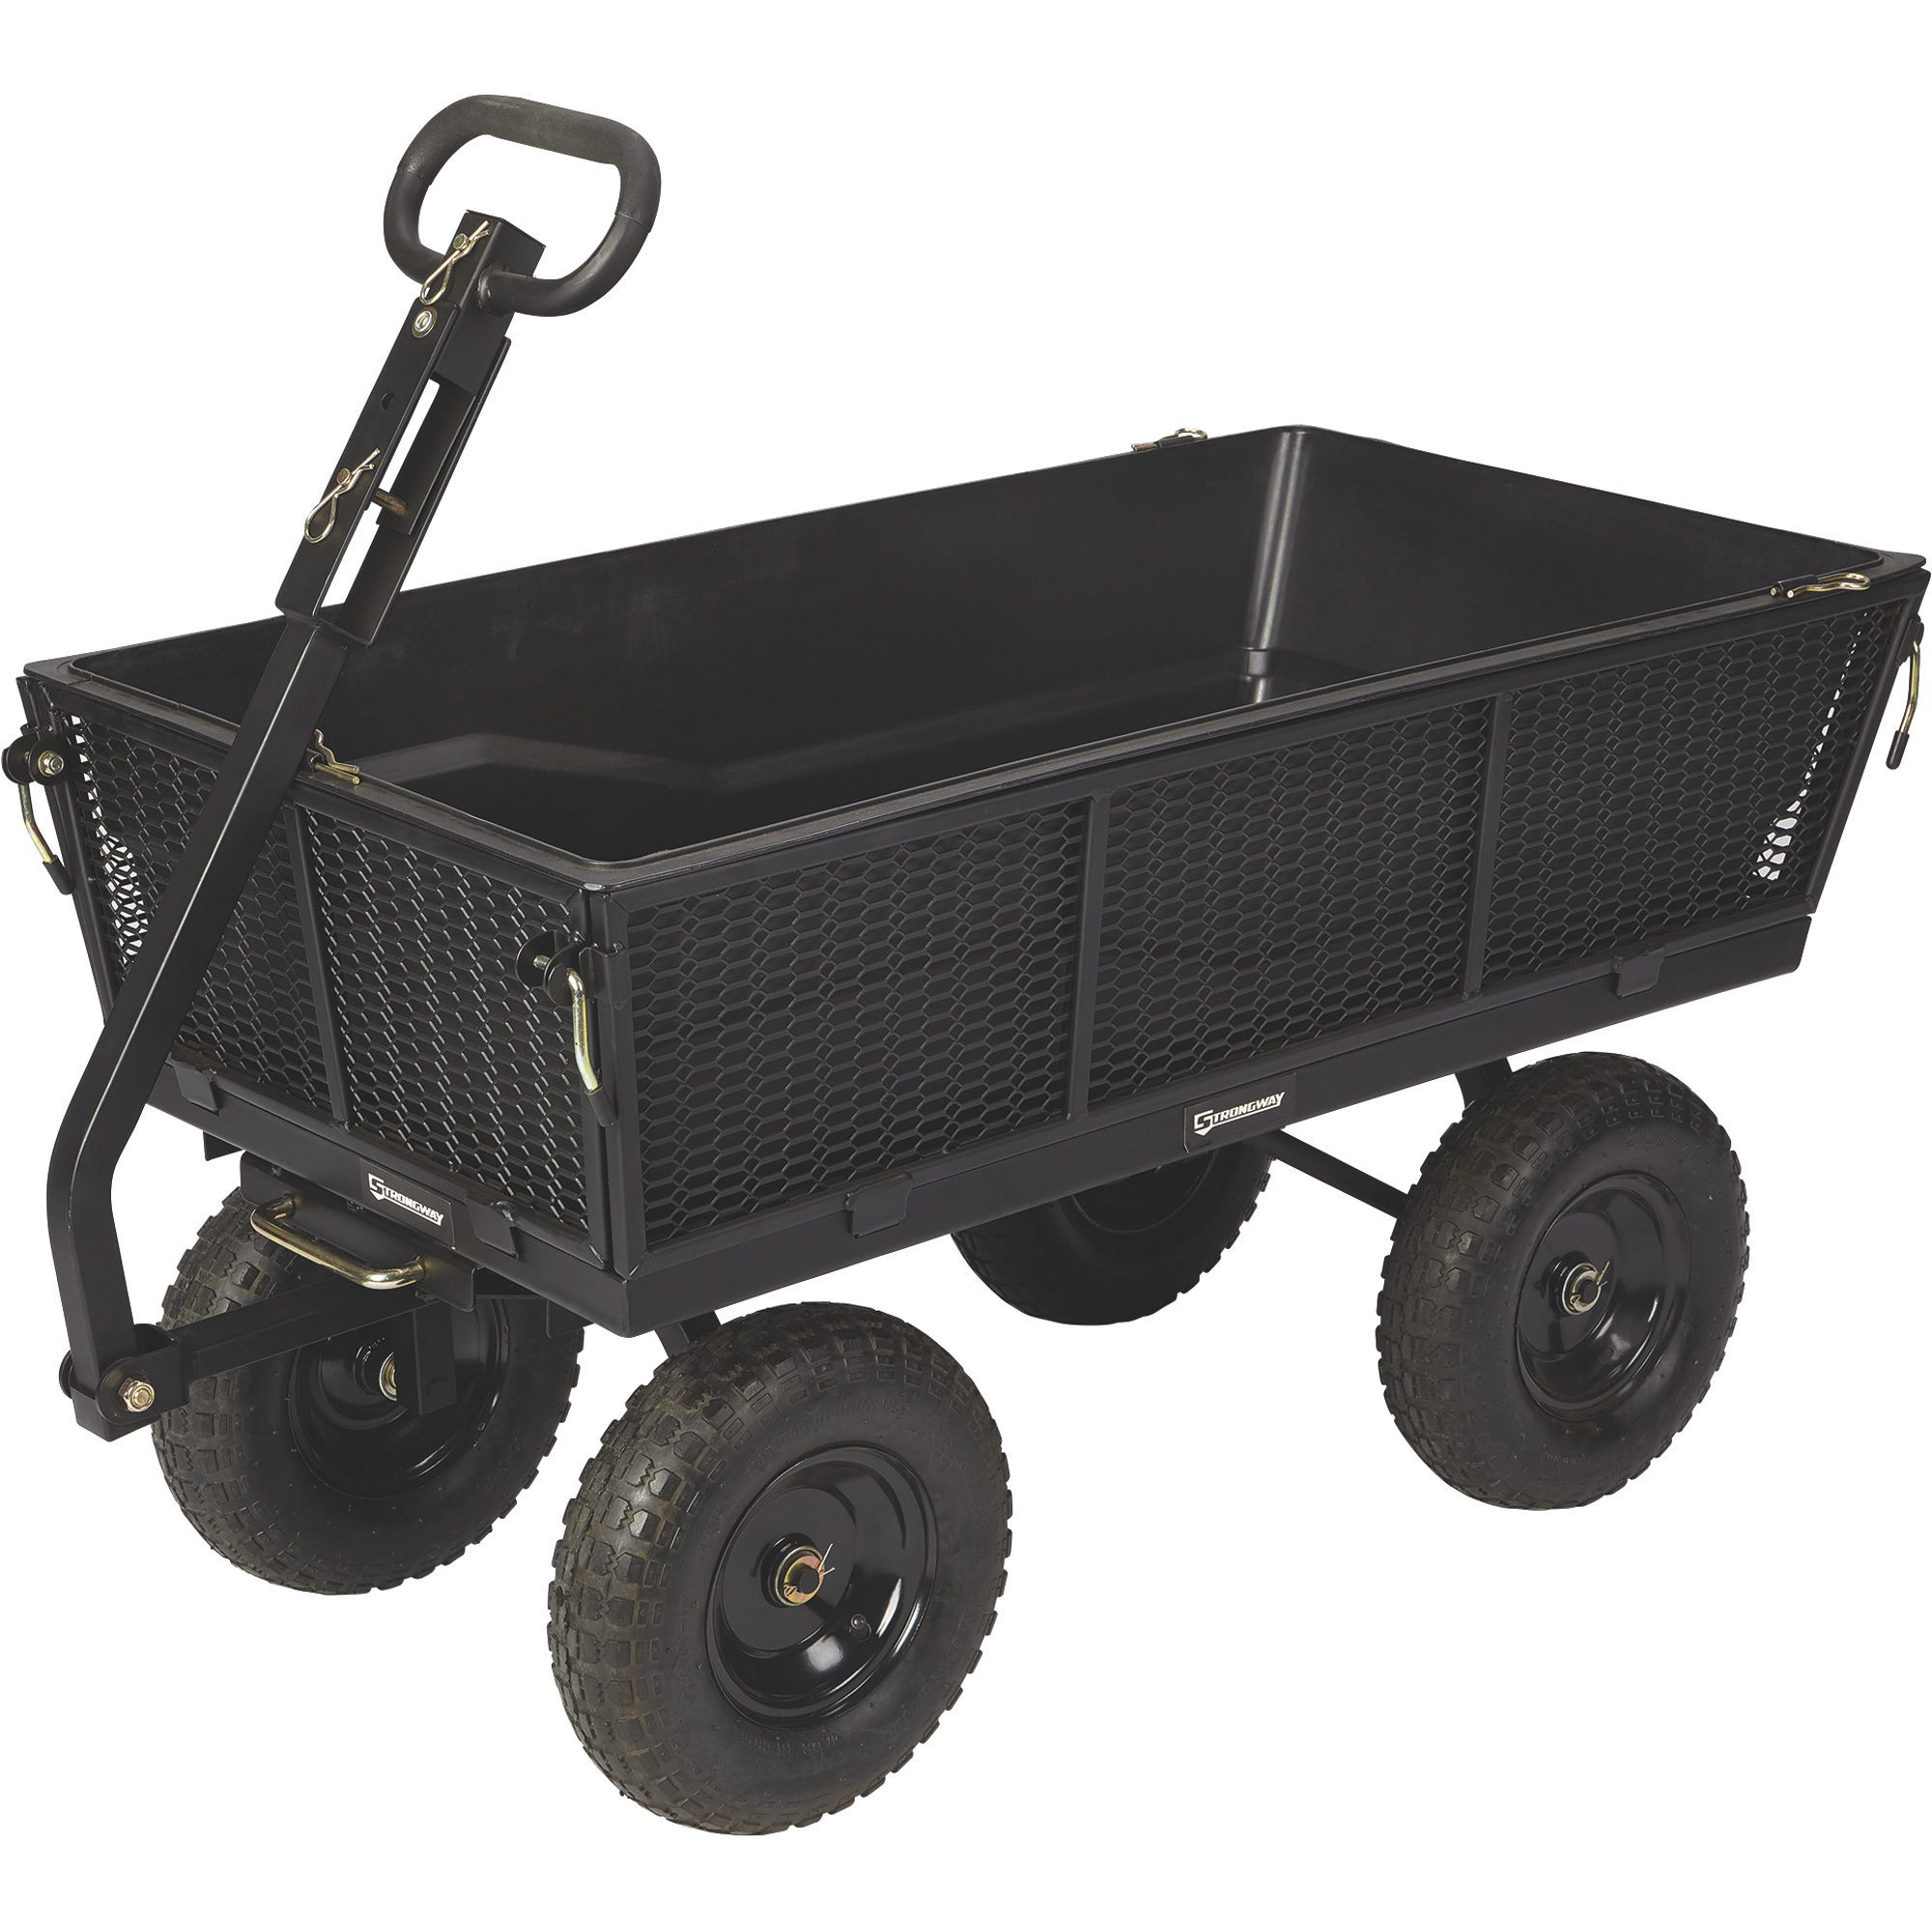 Strongway Steel Dump Cart, 9 Cu. Ft. 1200-Lb. Capacity, Includes Removable Liner